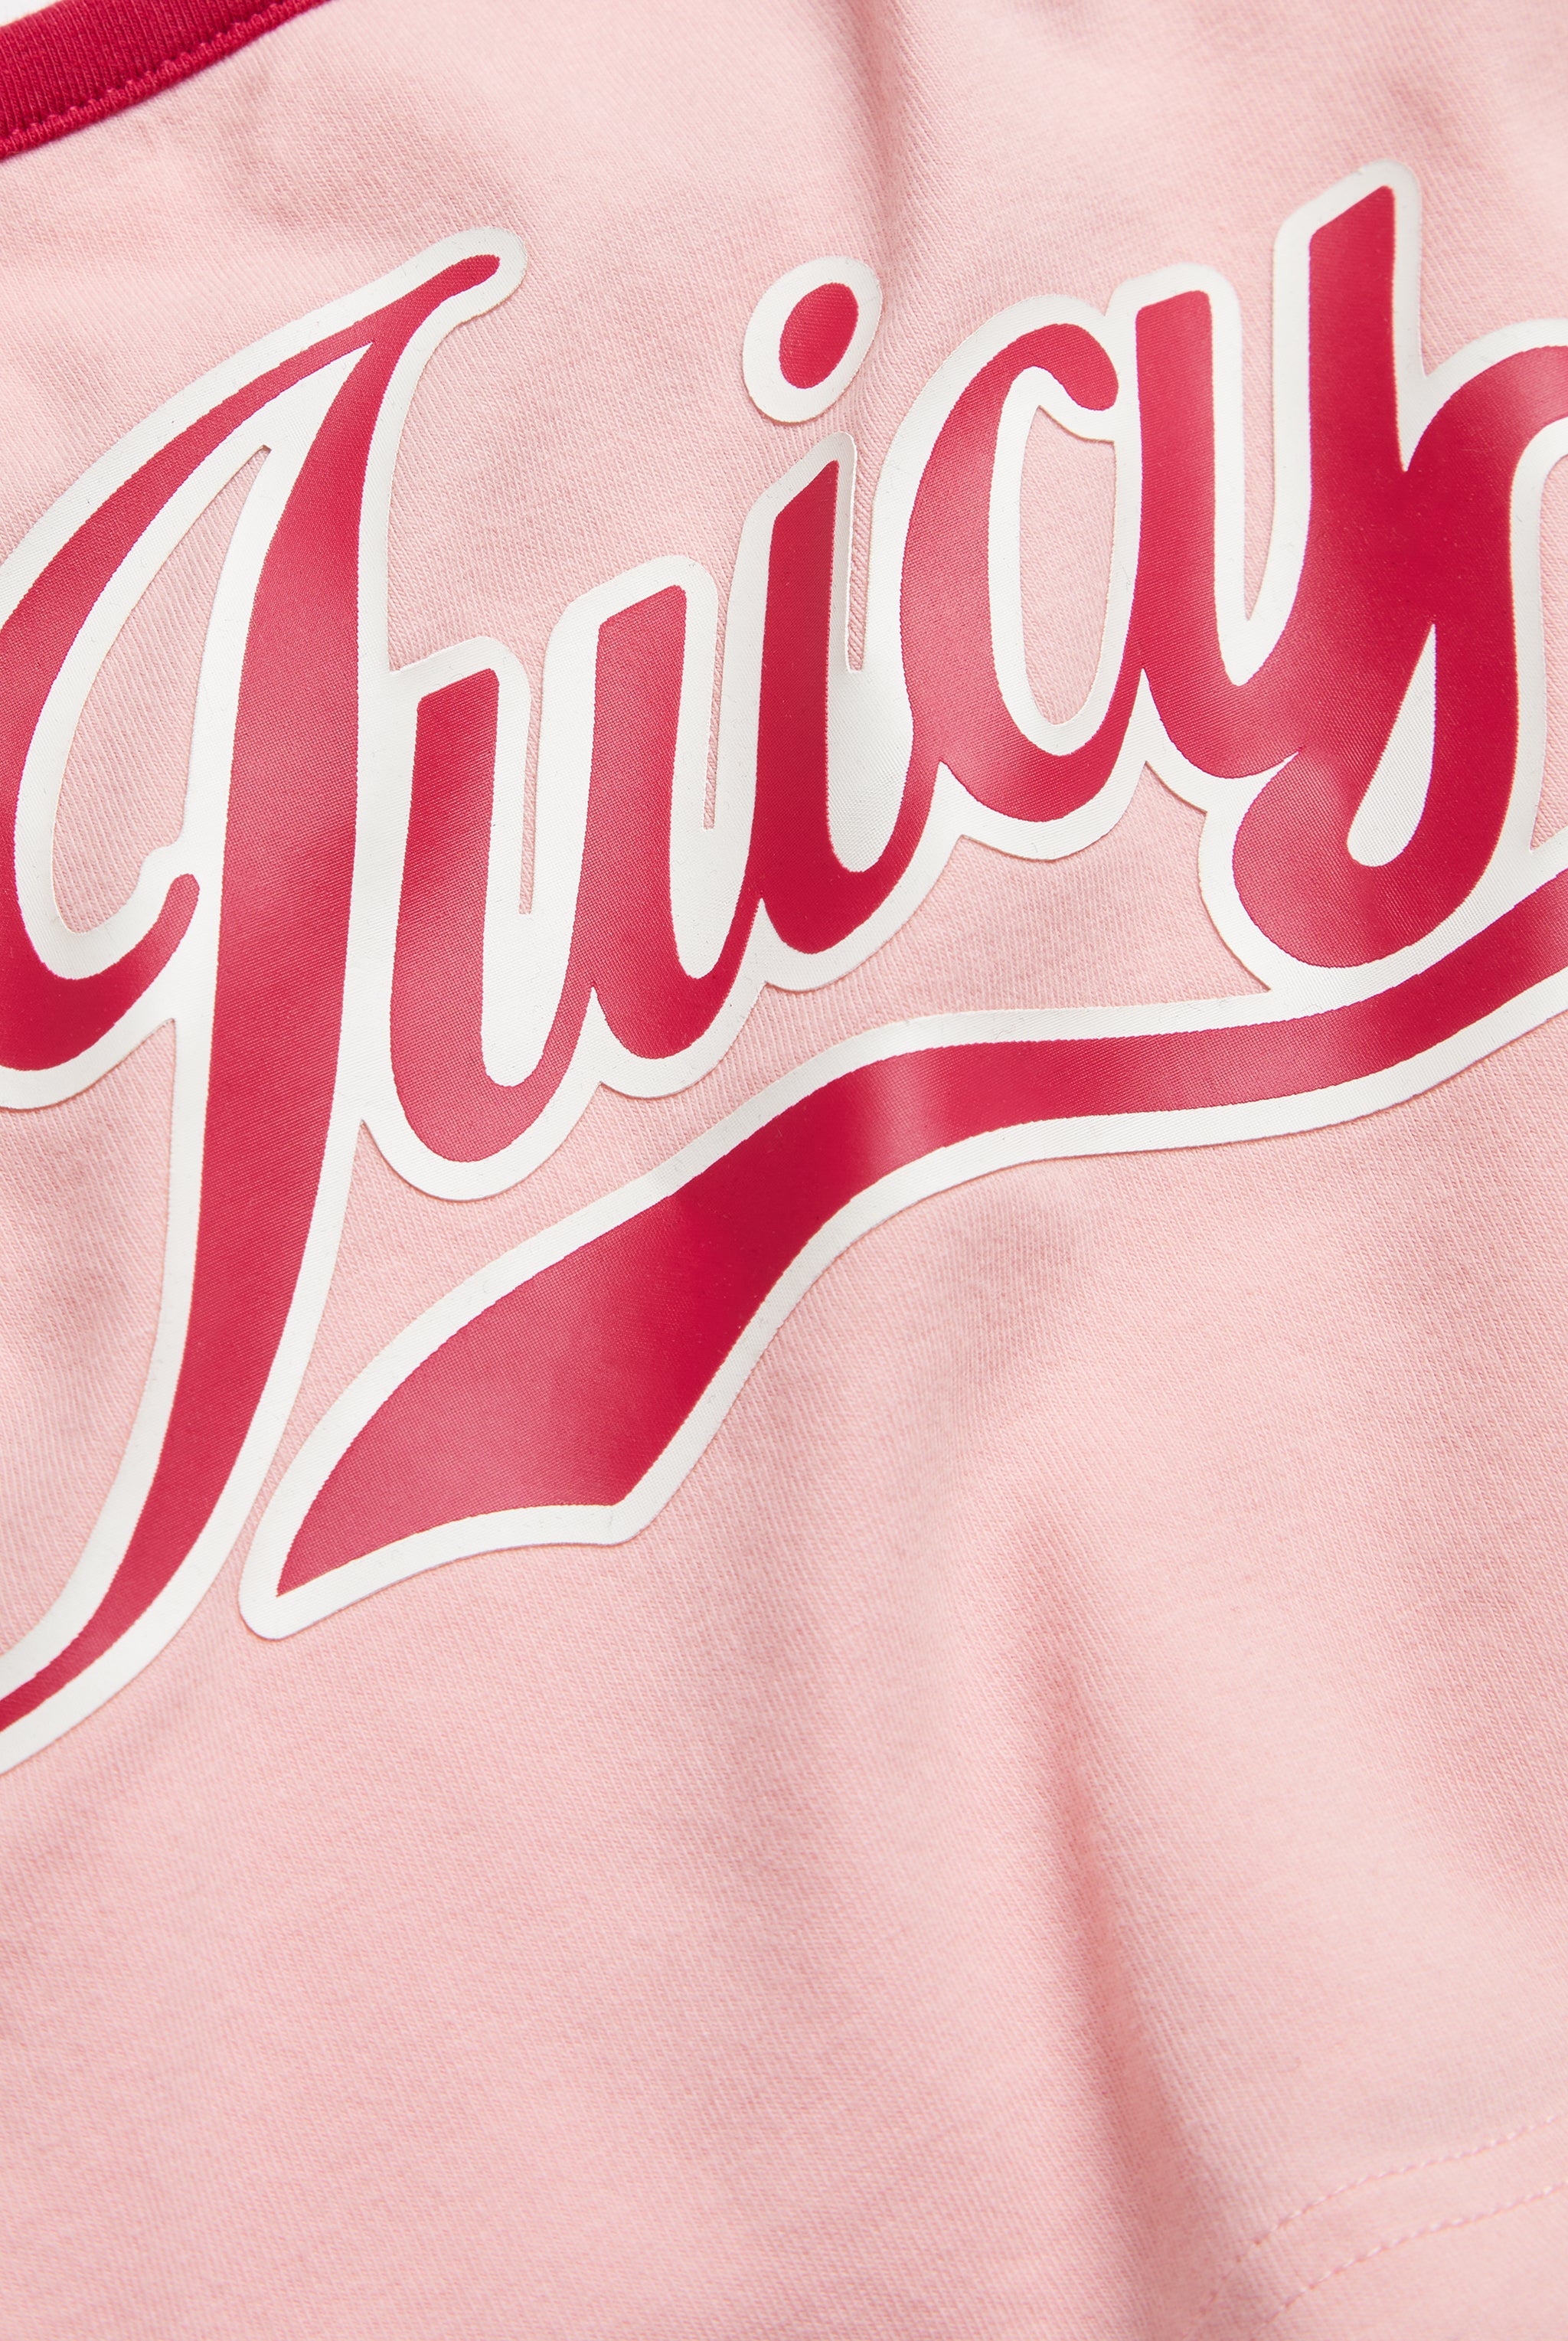 CANDY PINK RETRO LOGO CROPPED STRAP TOP – Juicy Couture UK